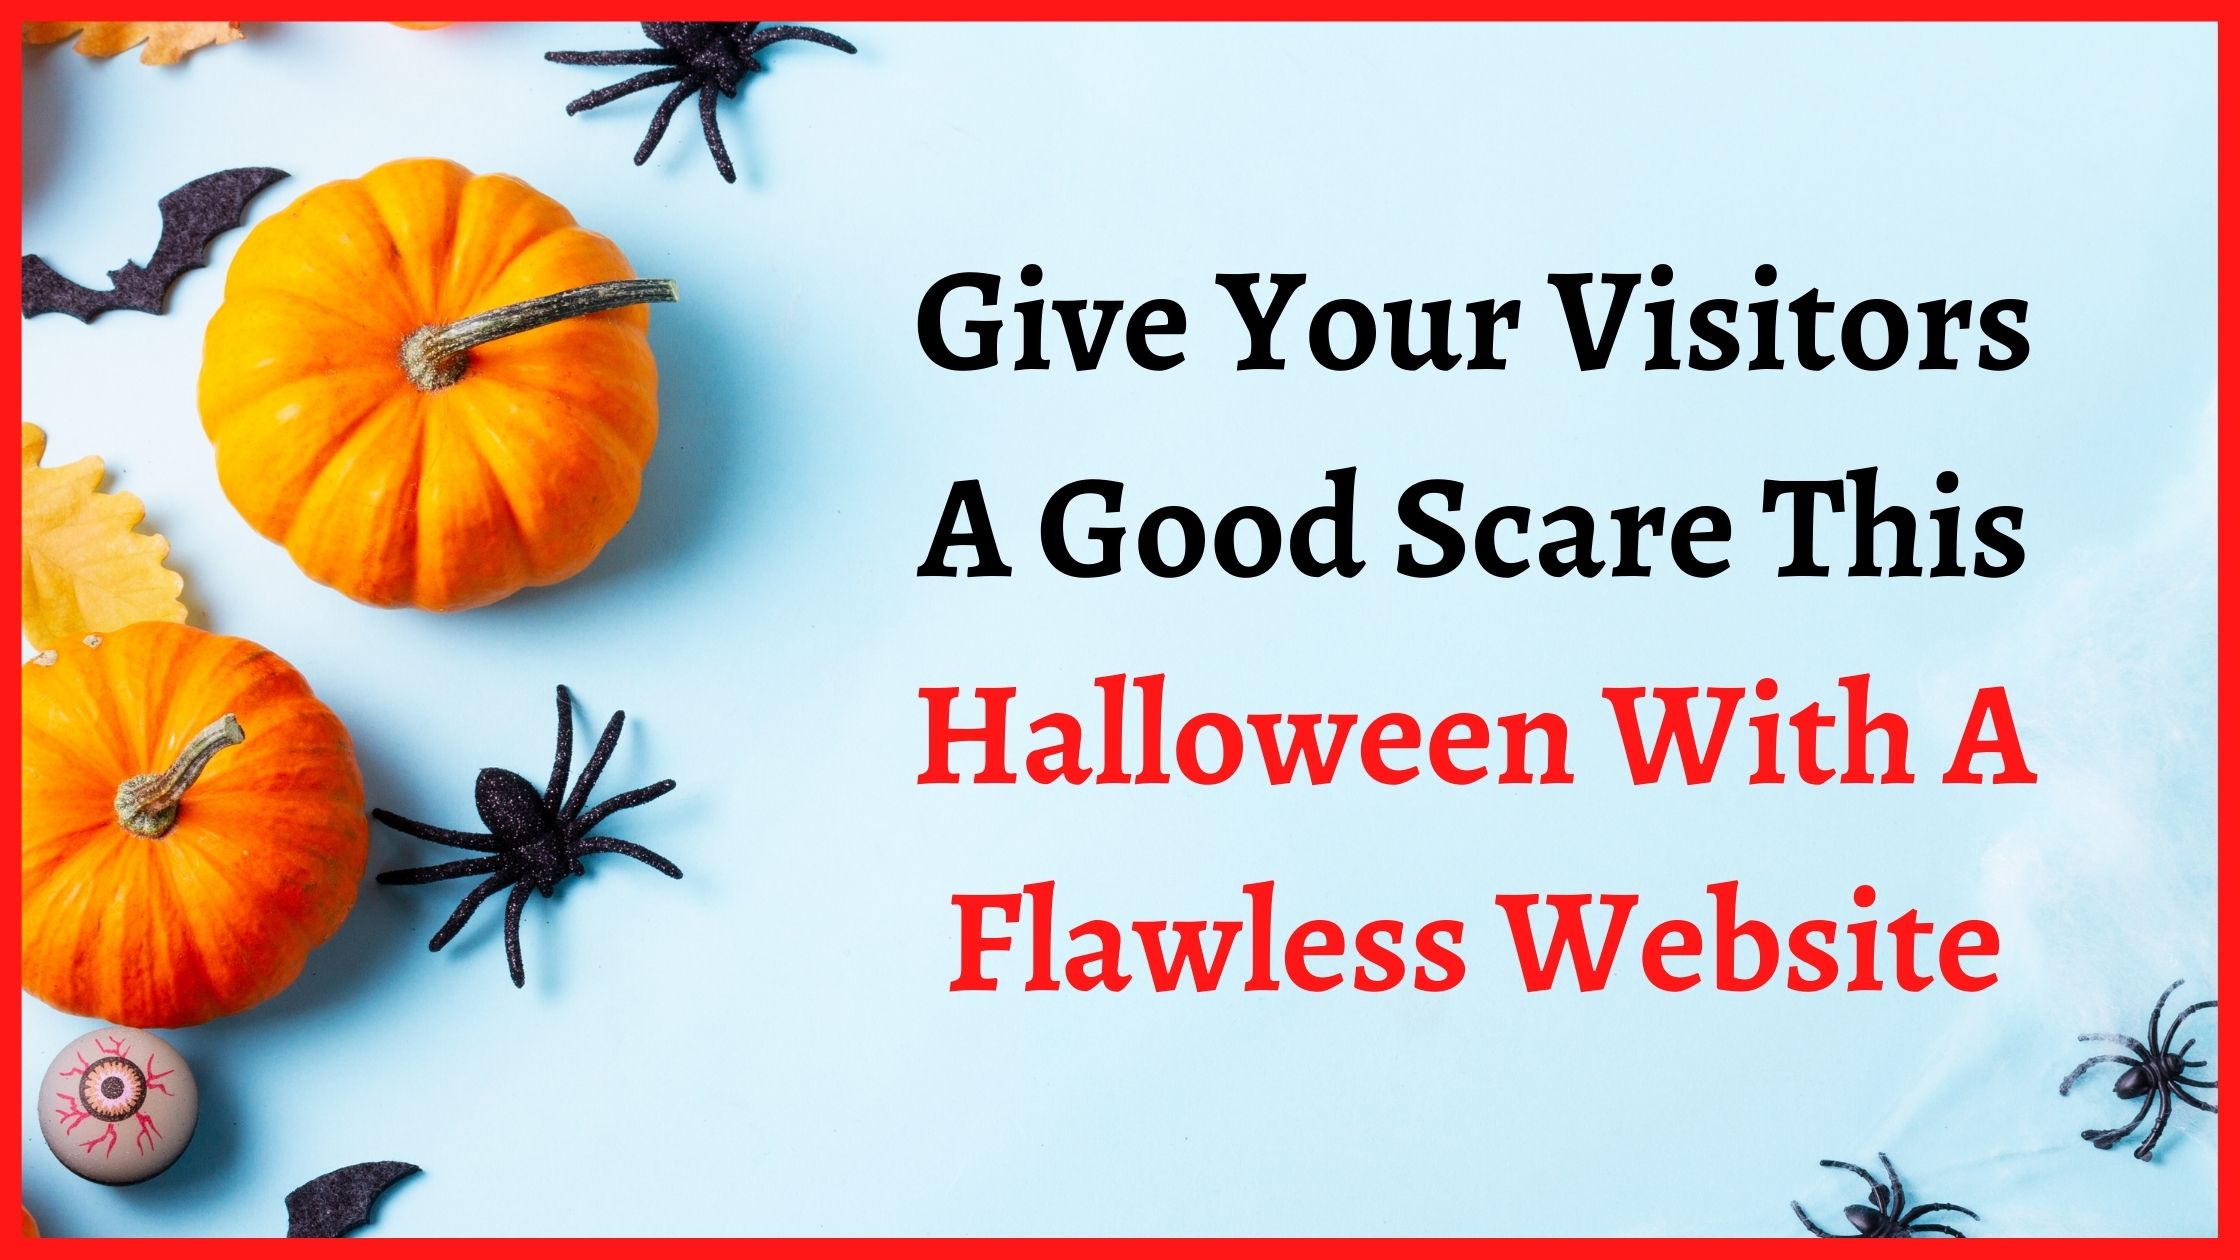 Give Your Visitors A Good Scare This Halloween With A Flawless Website